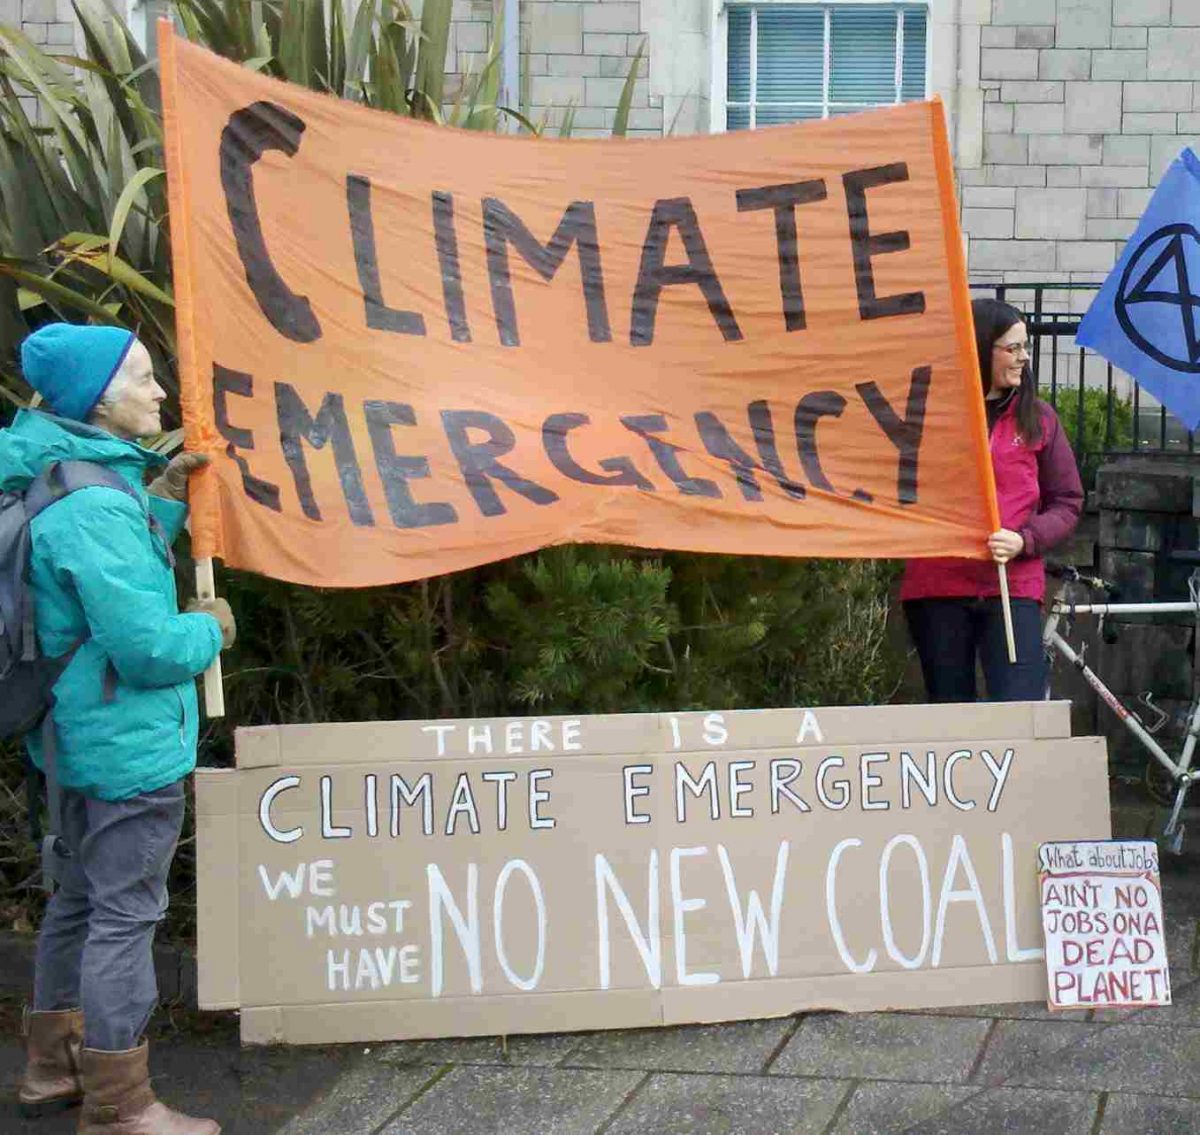 Image shows banners: "There is a Climate Emergency: We must have no new coal"